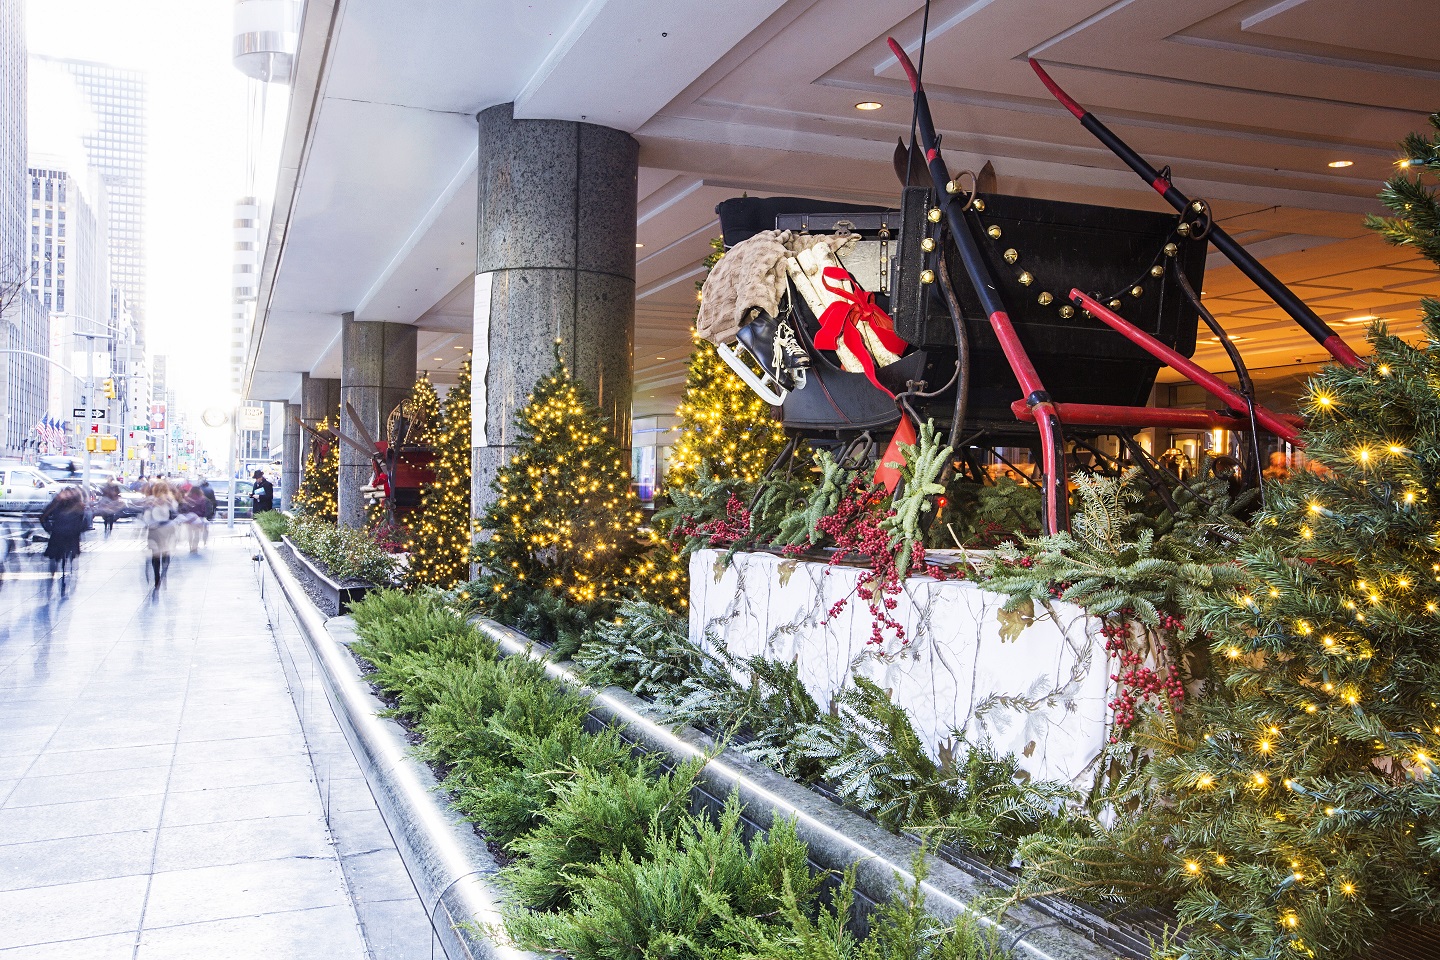 Let There Be Light: How We Make Your Building SHINE During the Holiday Season